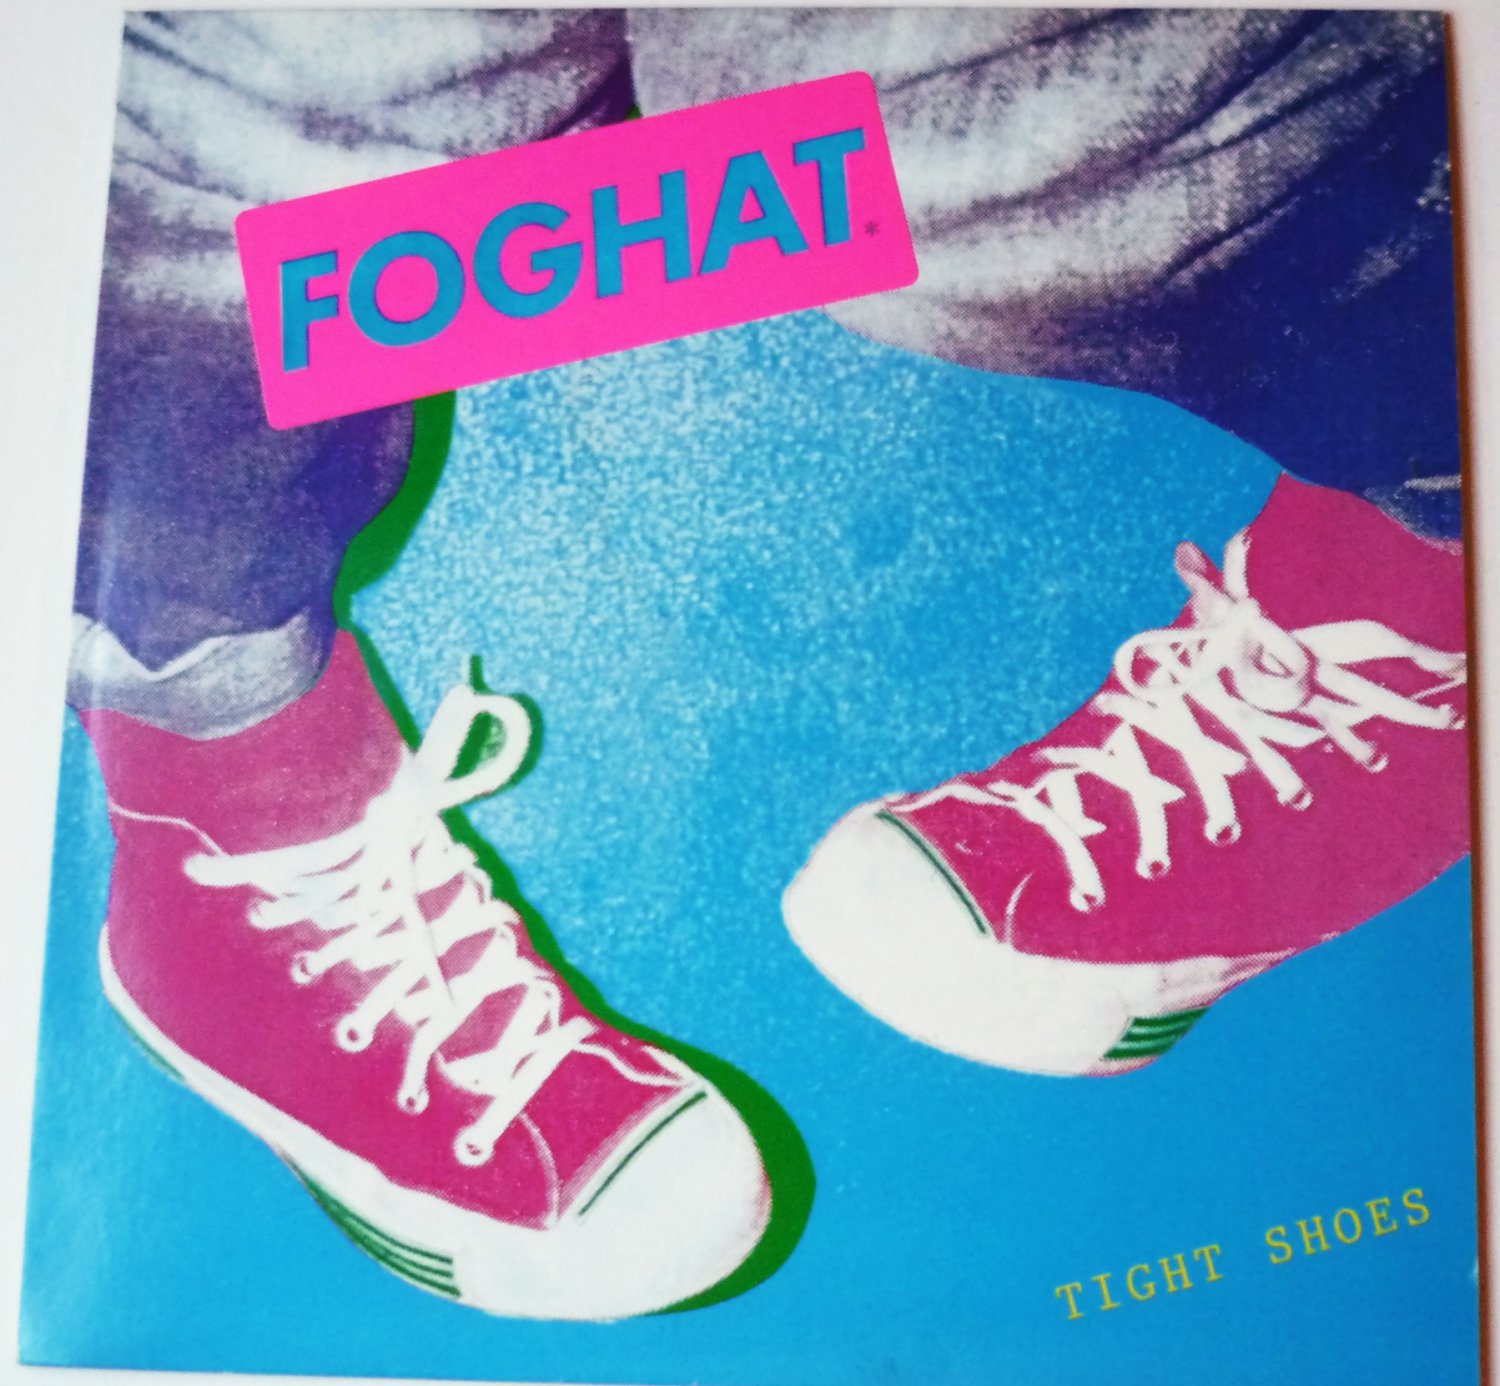 Tight Shoes lp by Foghat